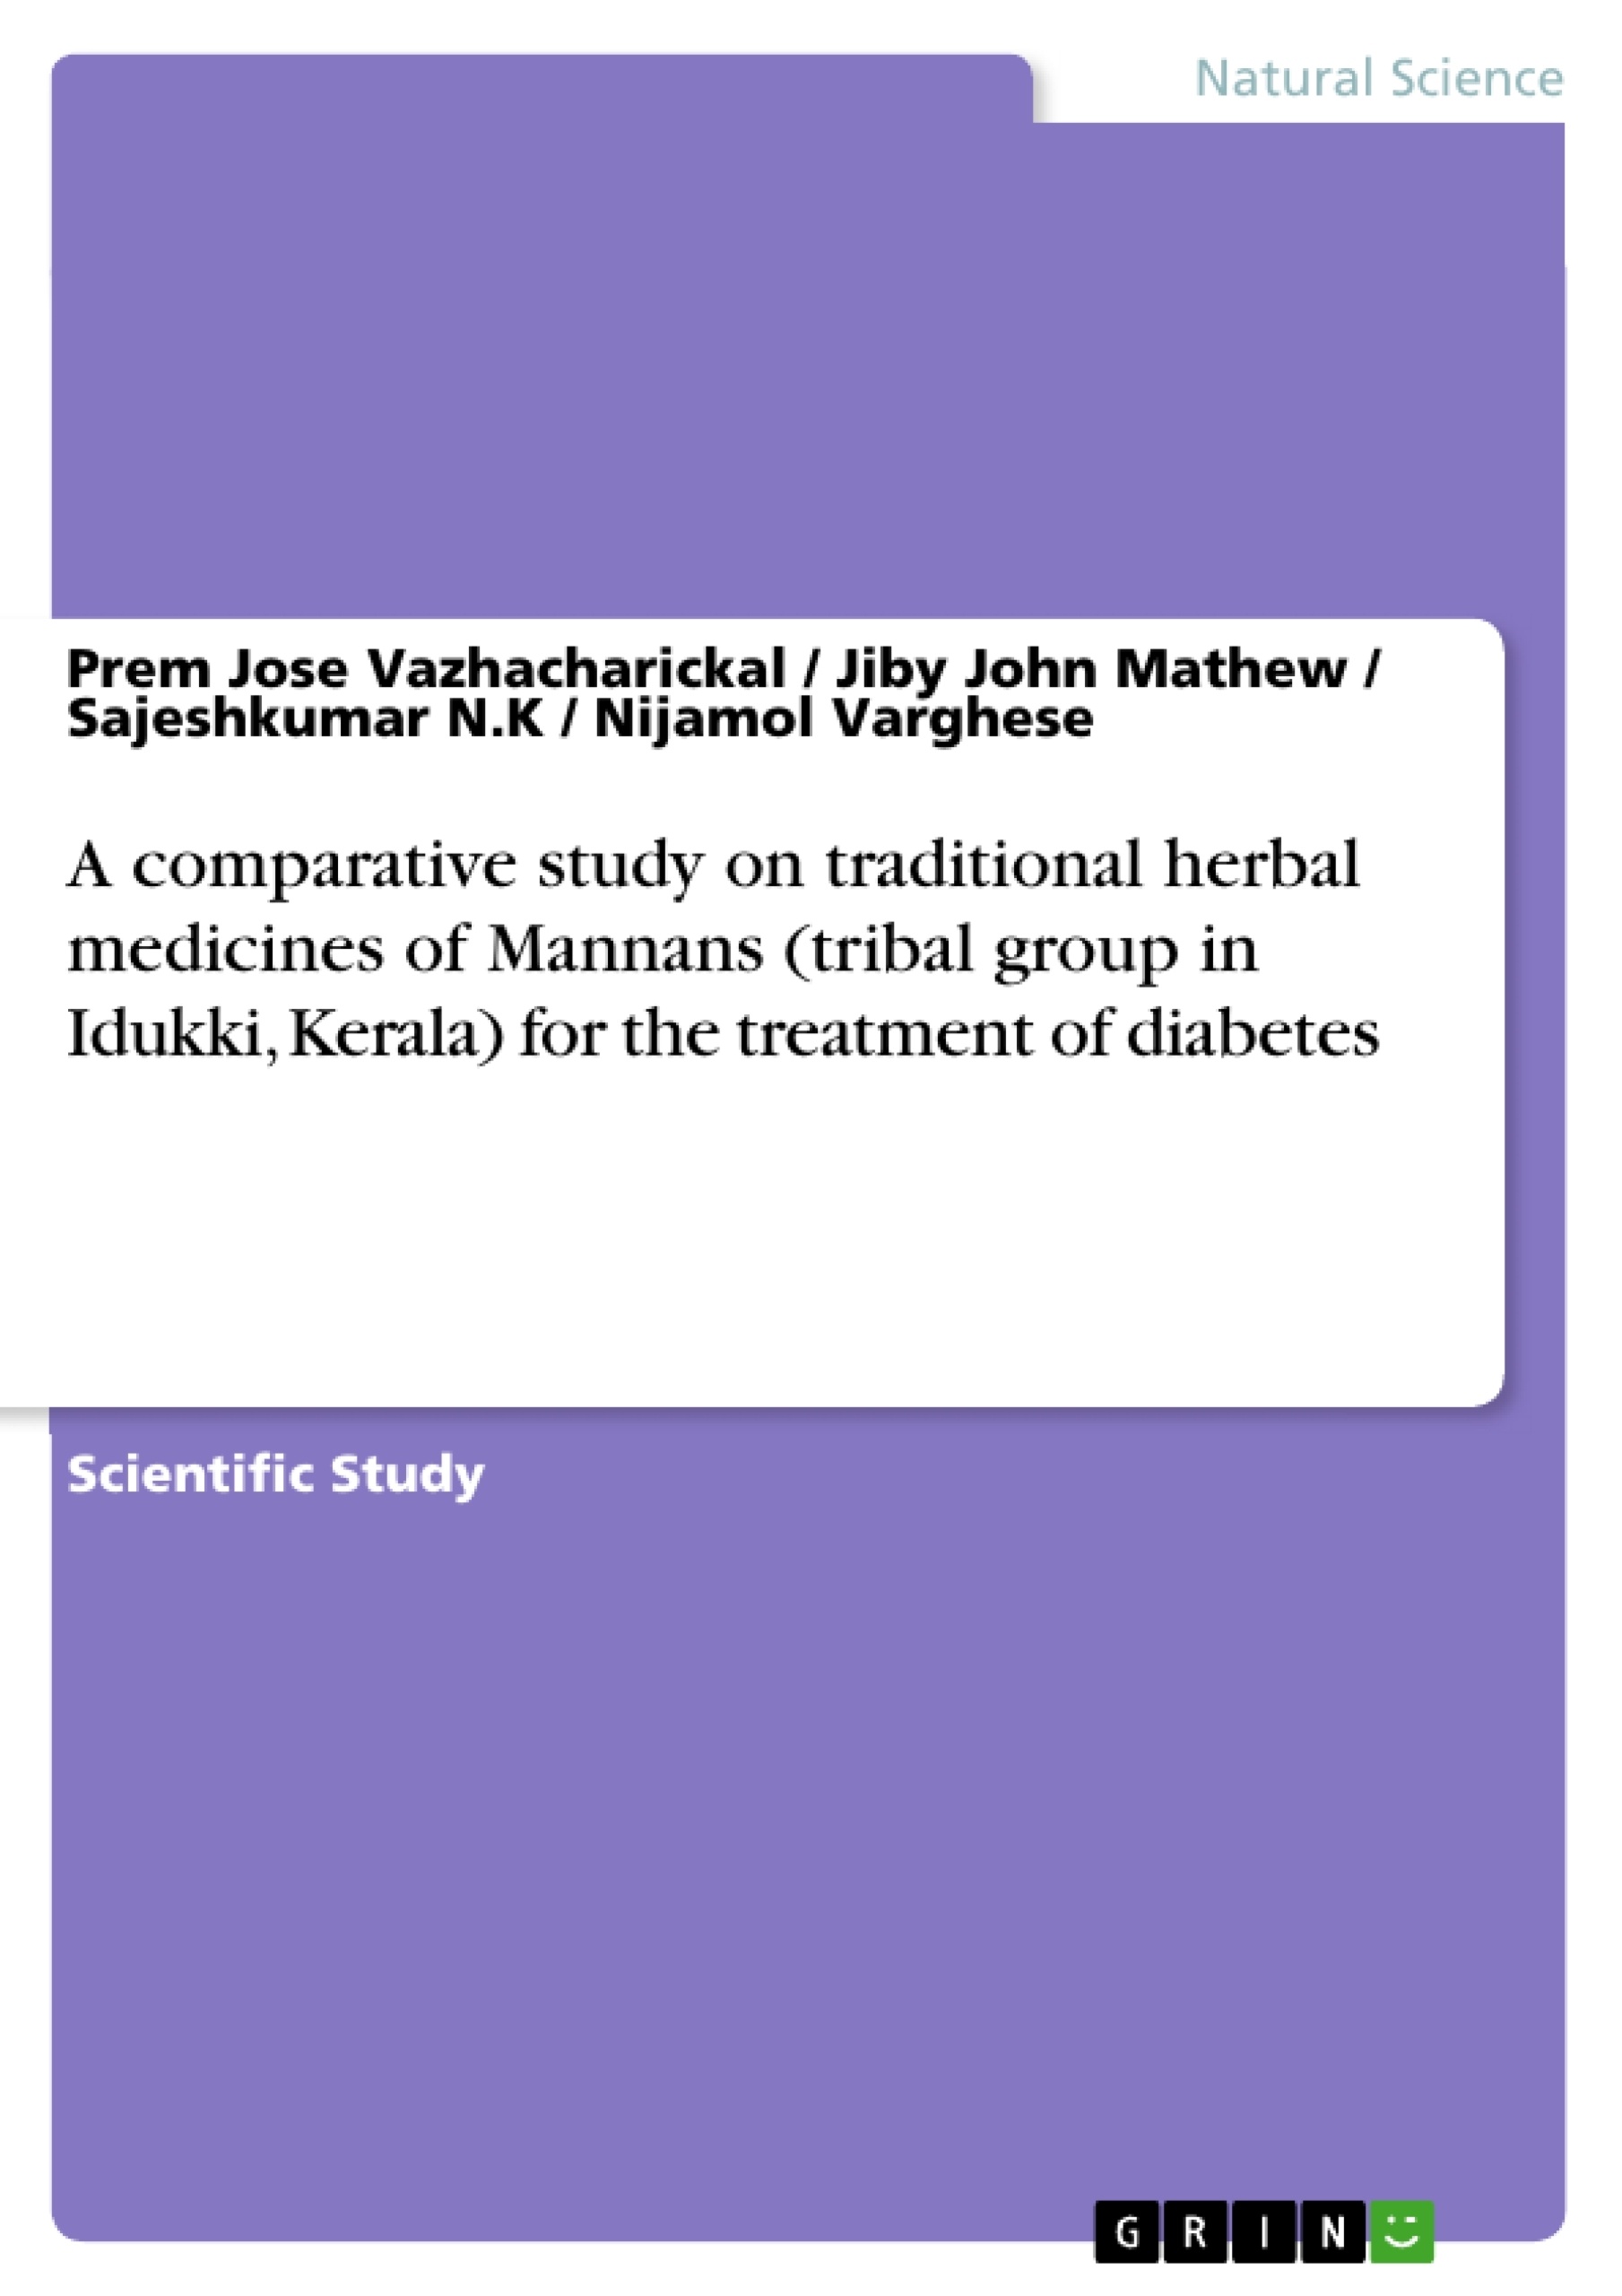 Título: A comparative study on traditional herbal medicines of Mannans (tribal group in Idukki, Kerala) for the treatment of diabetes